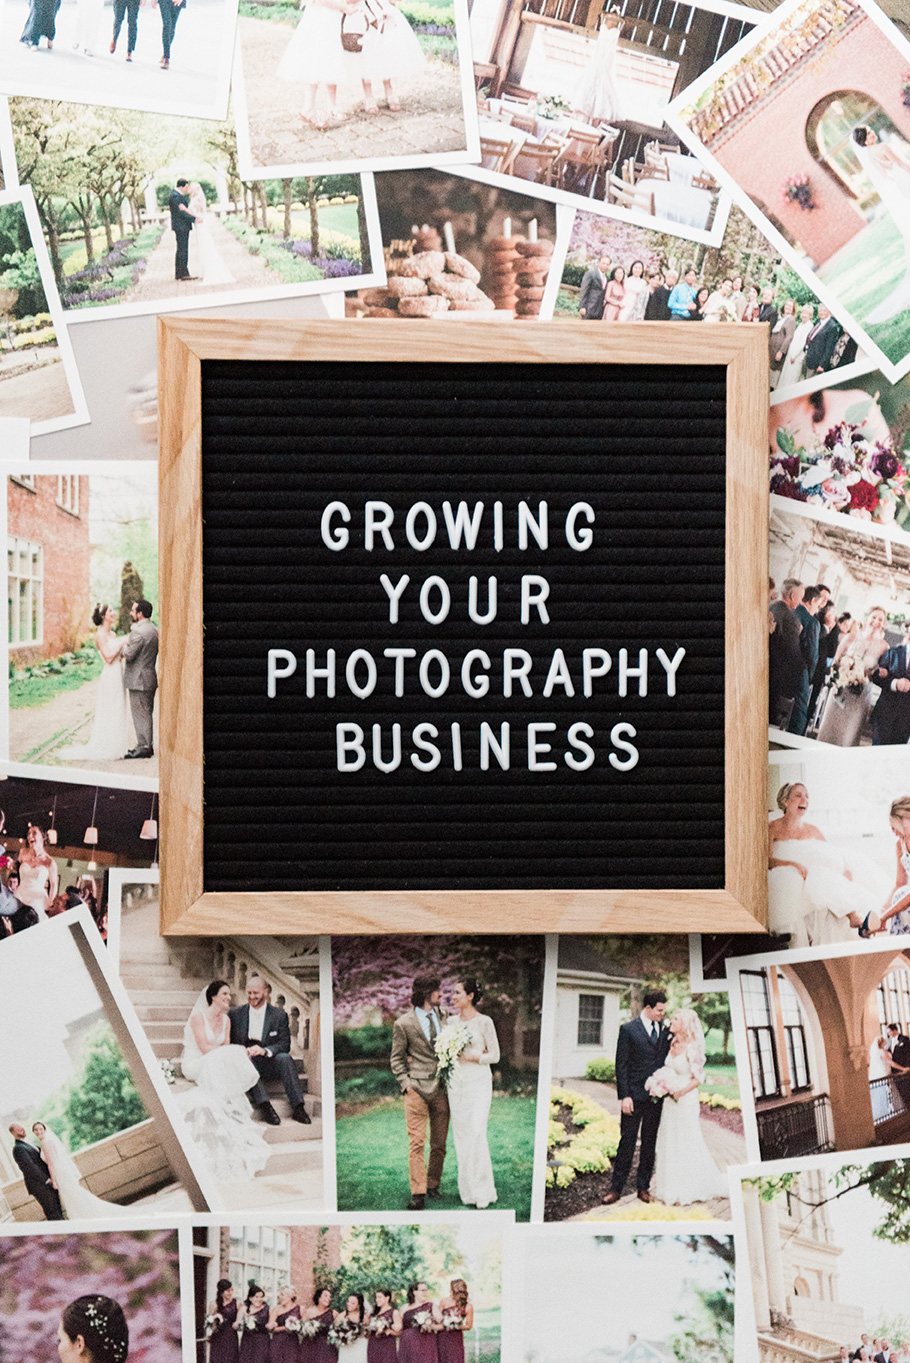 Growing your photography business